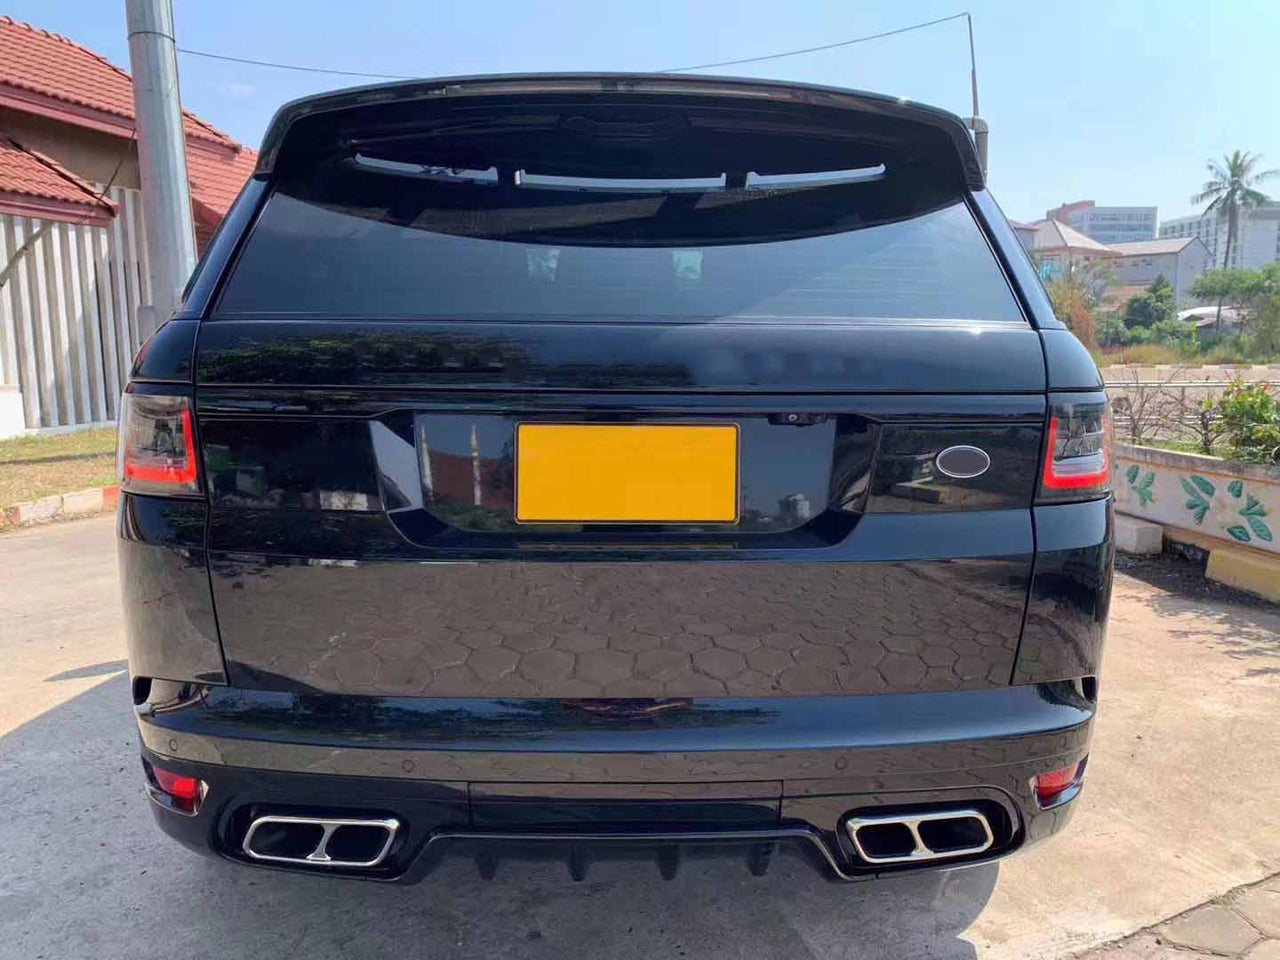 Range Rover sport SVR conversion from 2013 to 2018